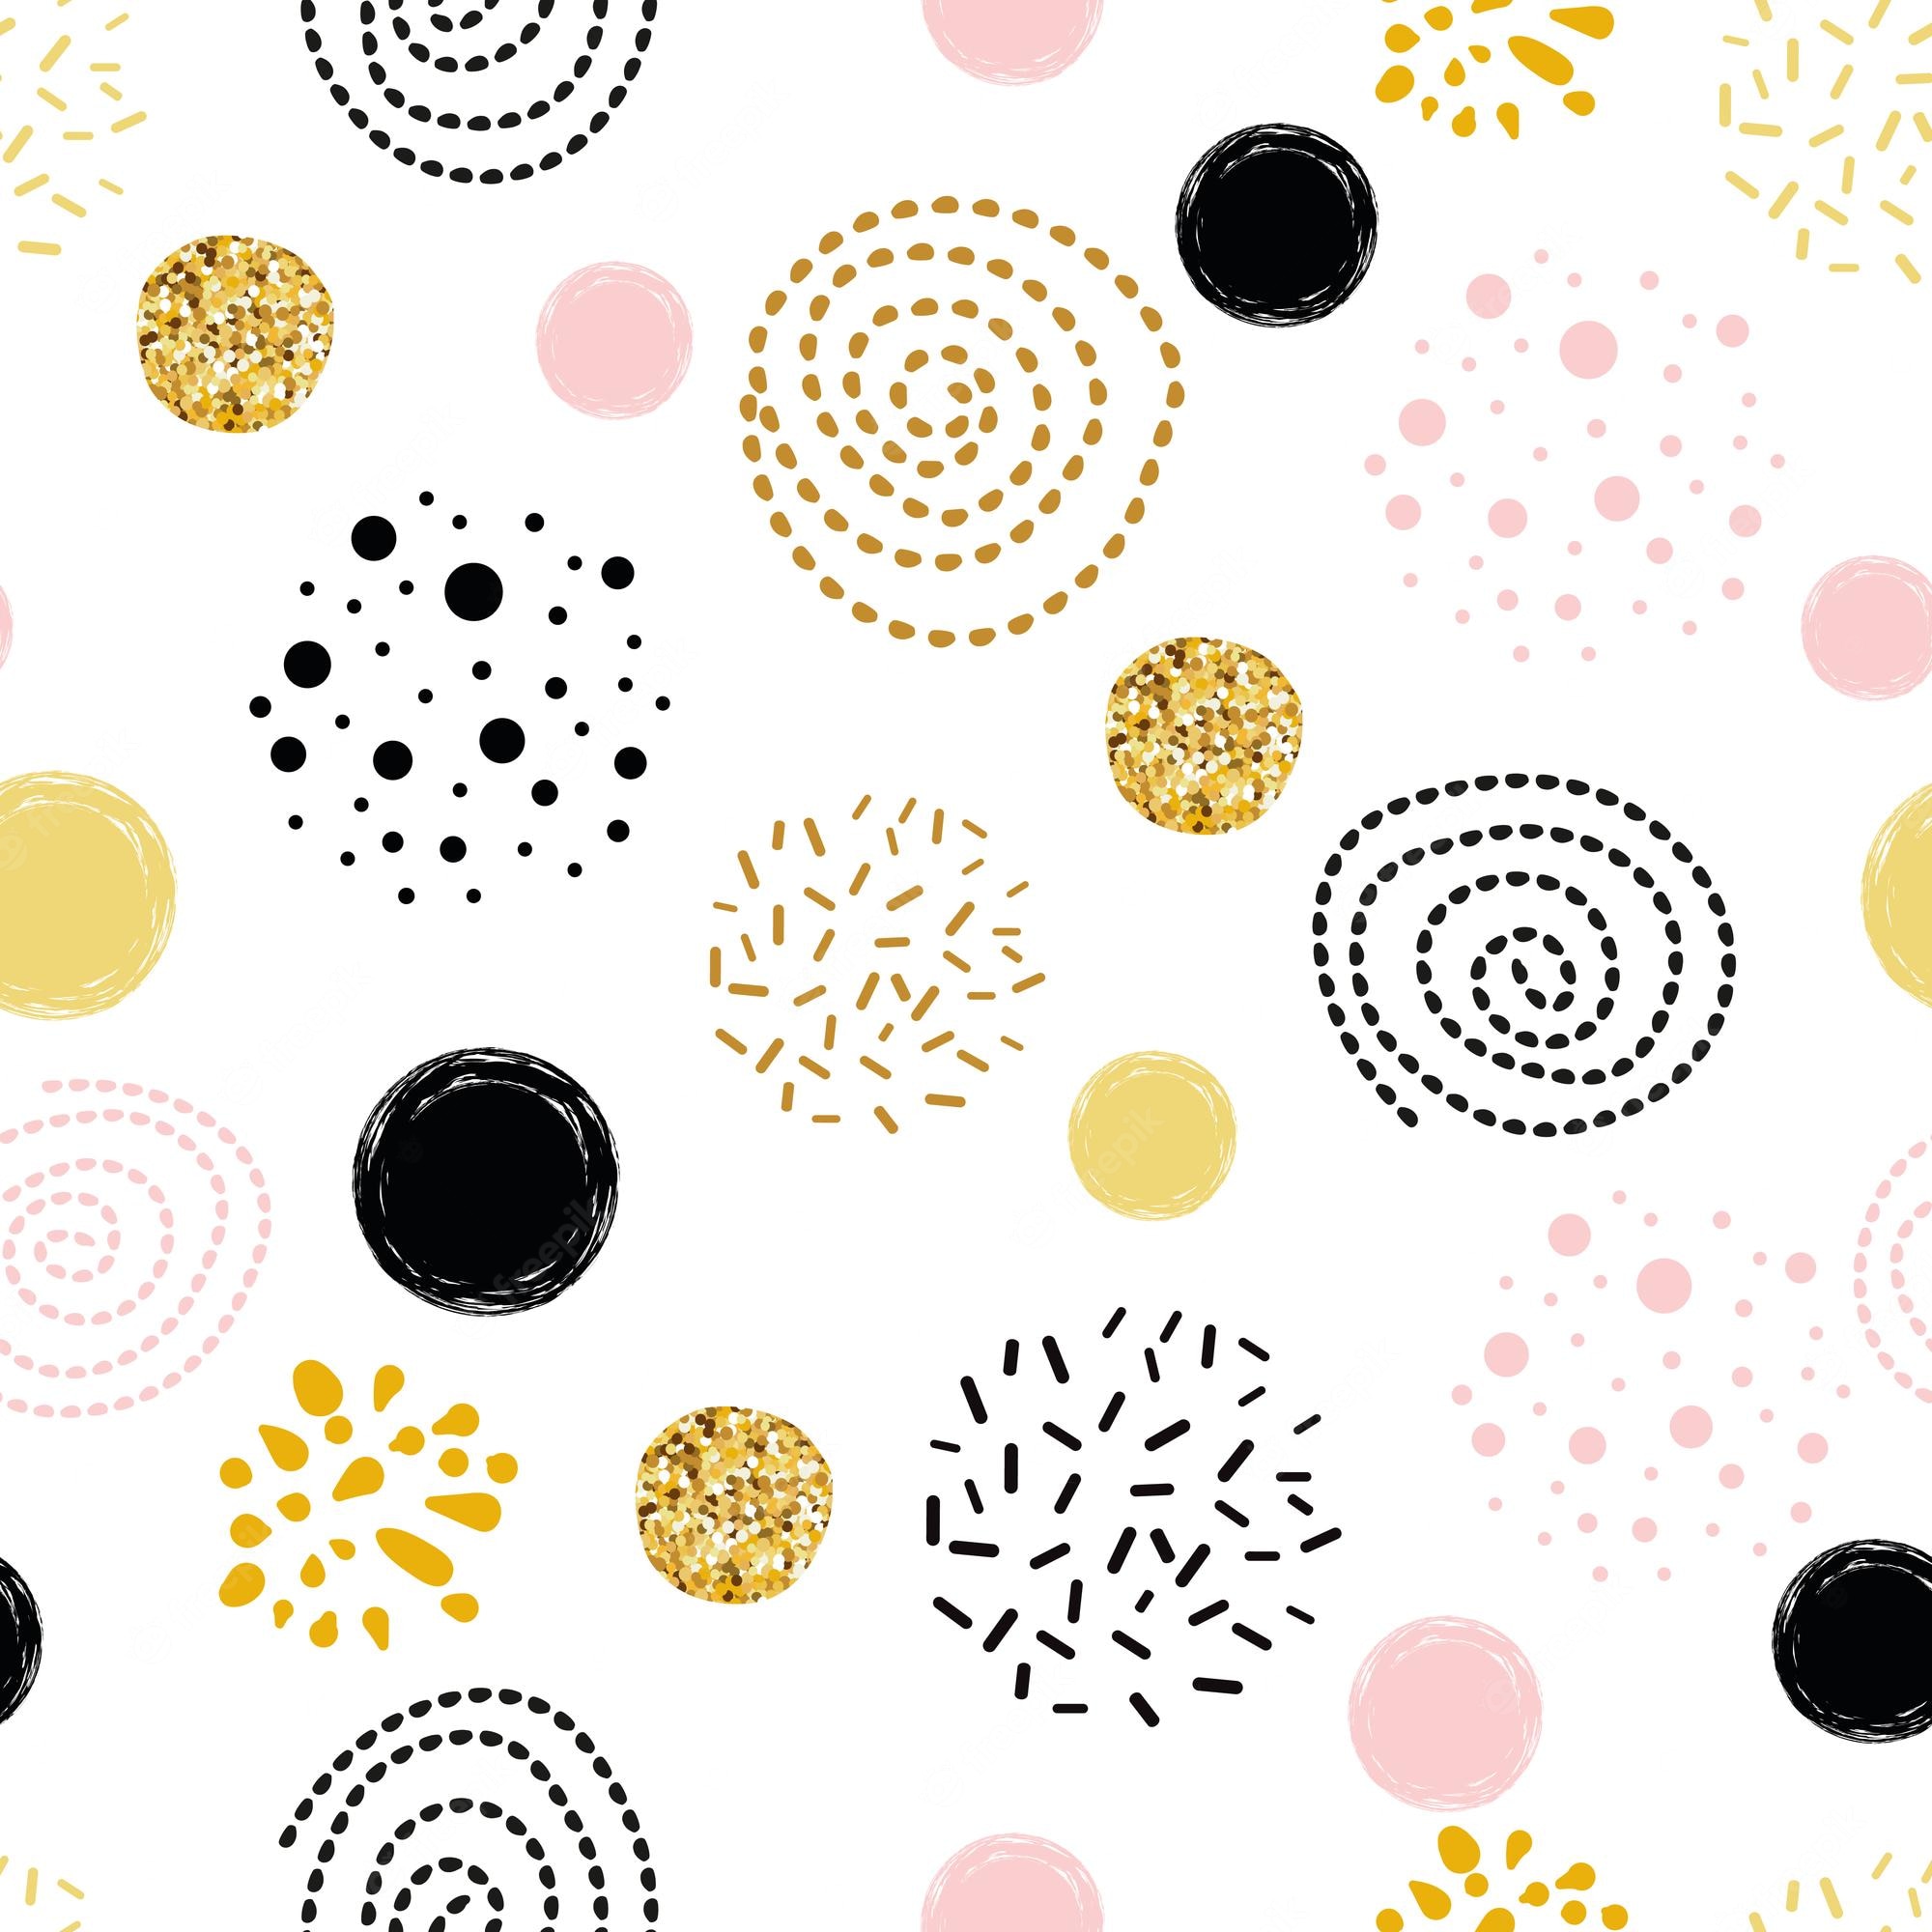 Premium Vector. Cute seamless pattern polka dot abstract ornament decorated golden pink black hand drawn circles round shapes vector illustration for wallpaper wrap gold dots sparkles shining dots background